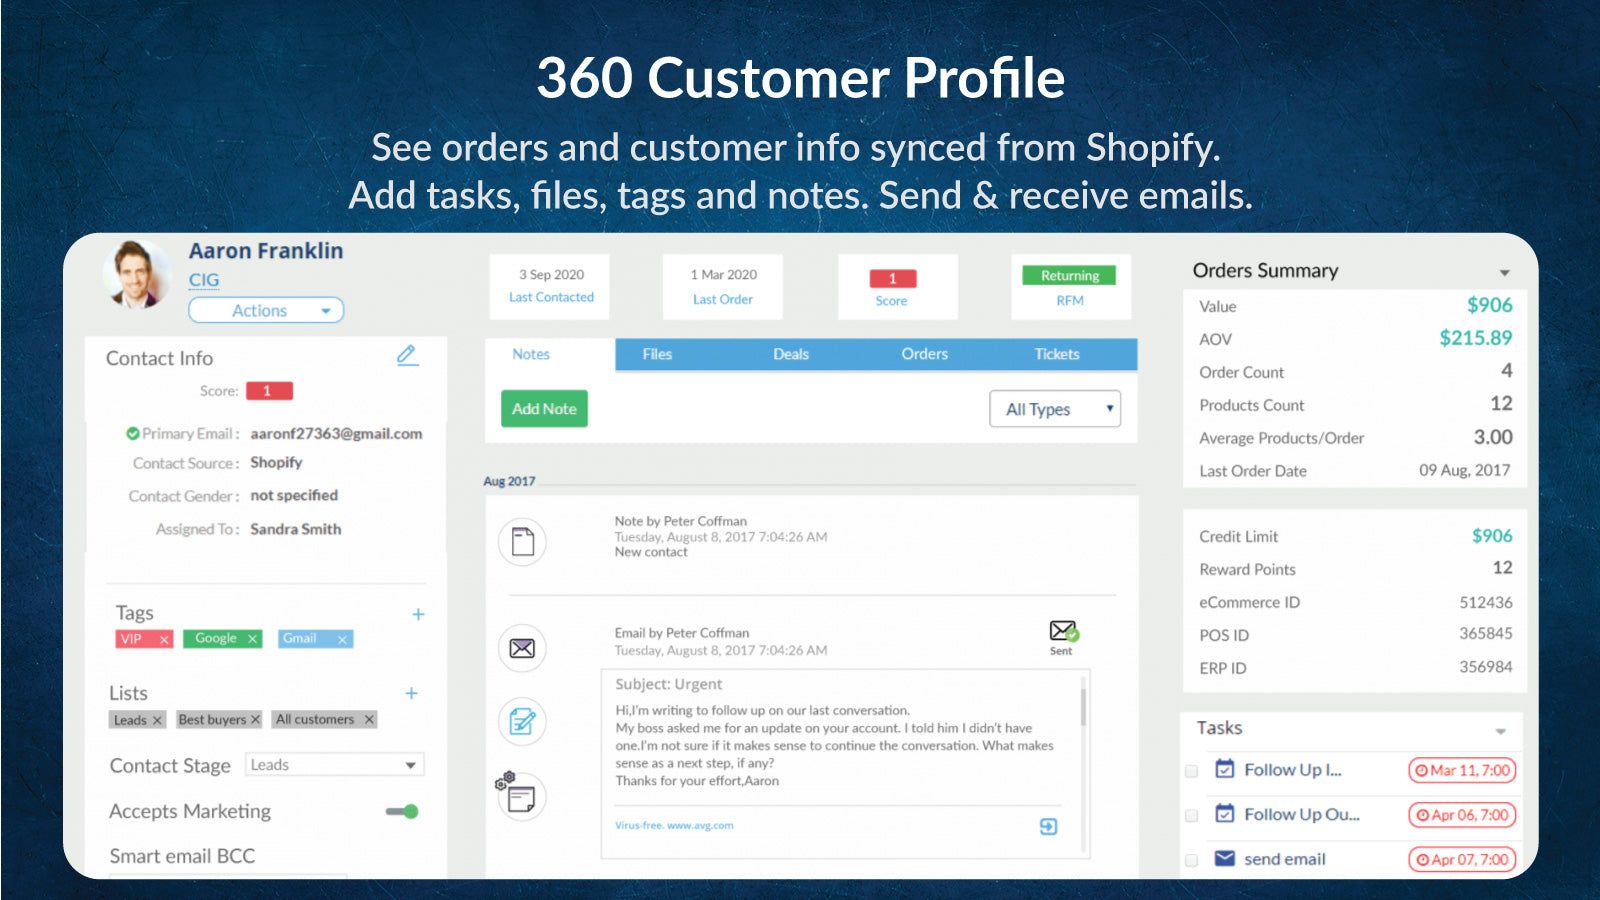 360 Customer Profile with Orders